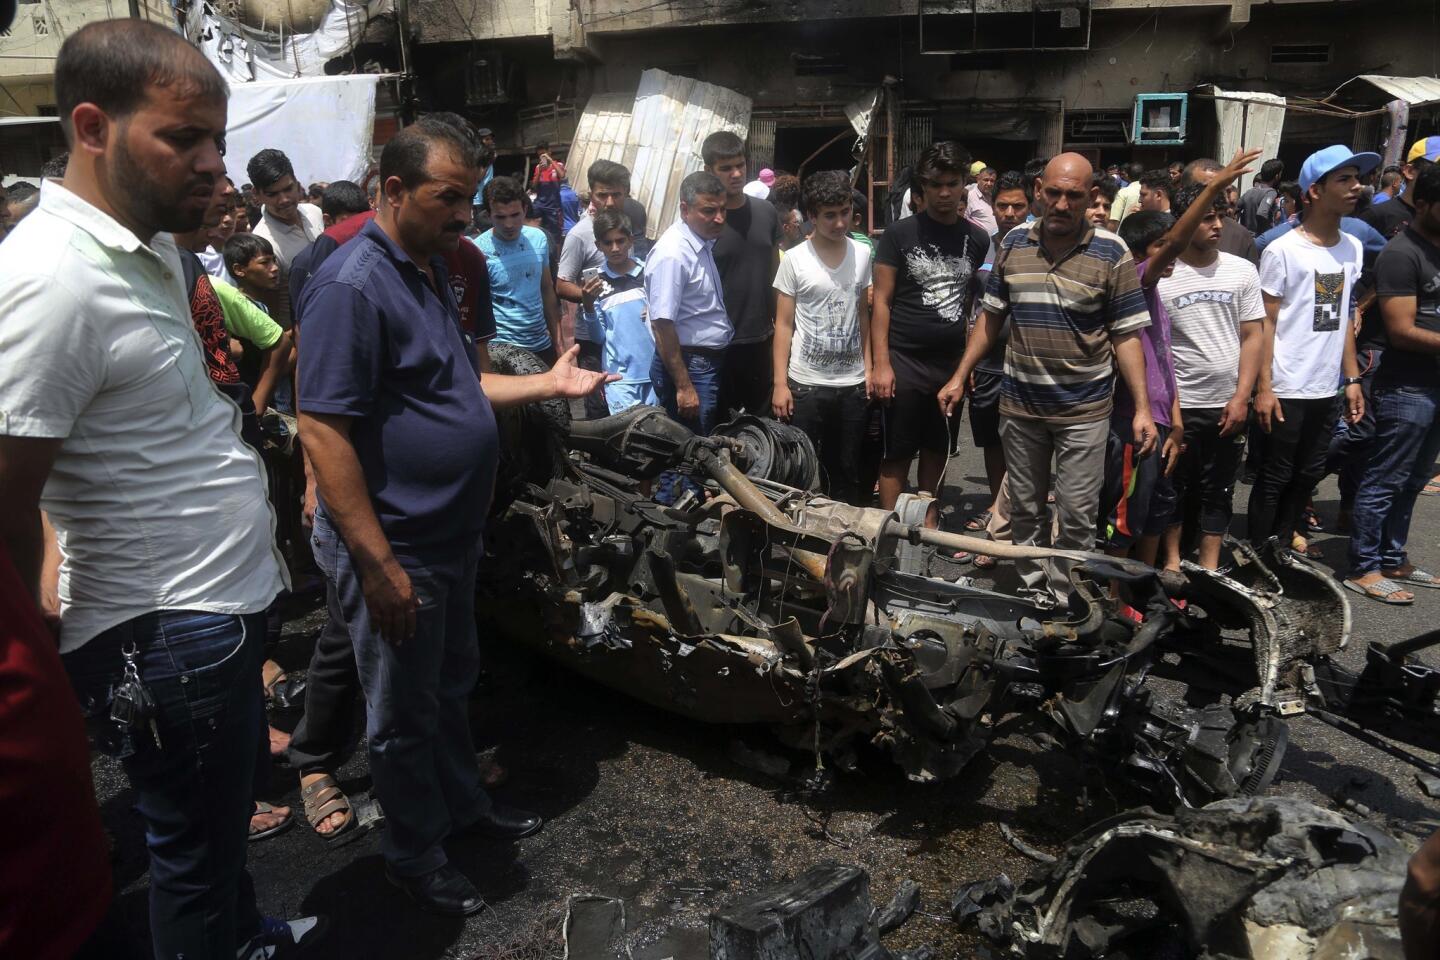 People inspect the damage after a car bomb exploded at a crowded outdoor market in Sadr City, Iraq, on May 11, 2016.